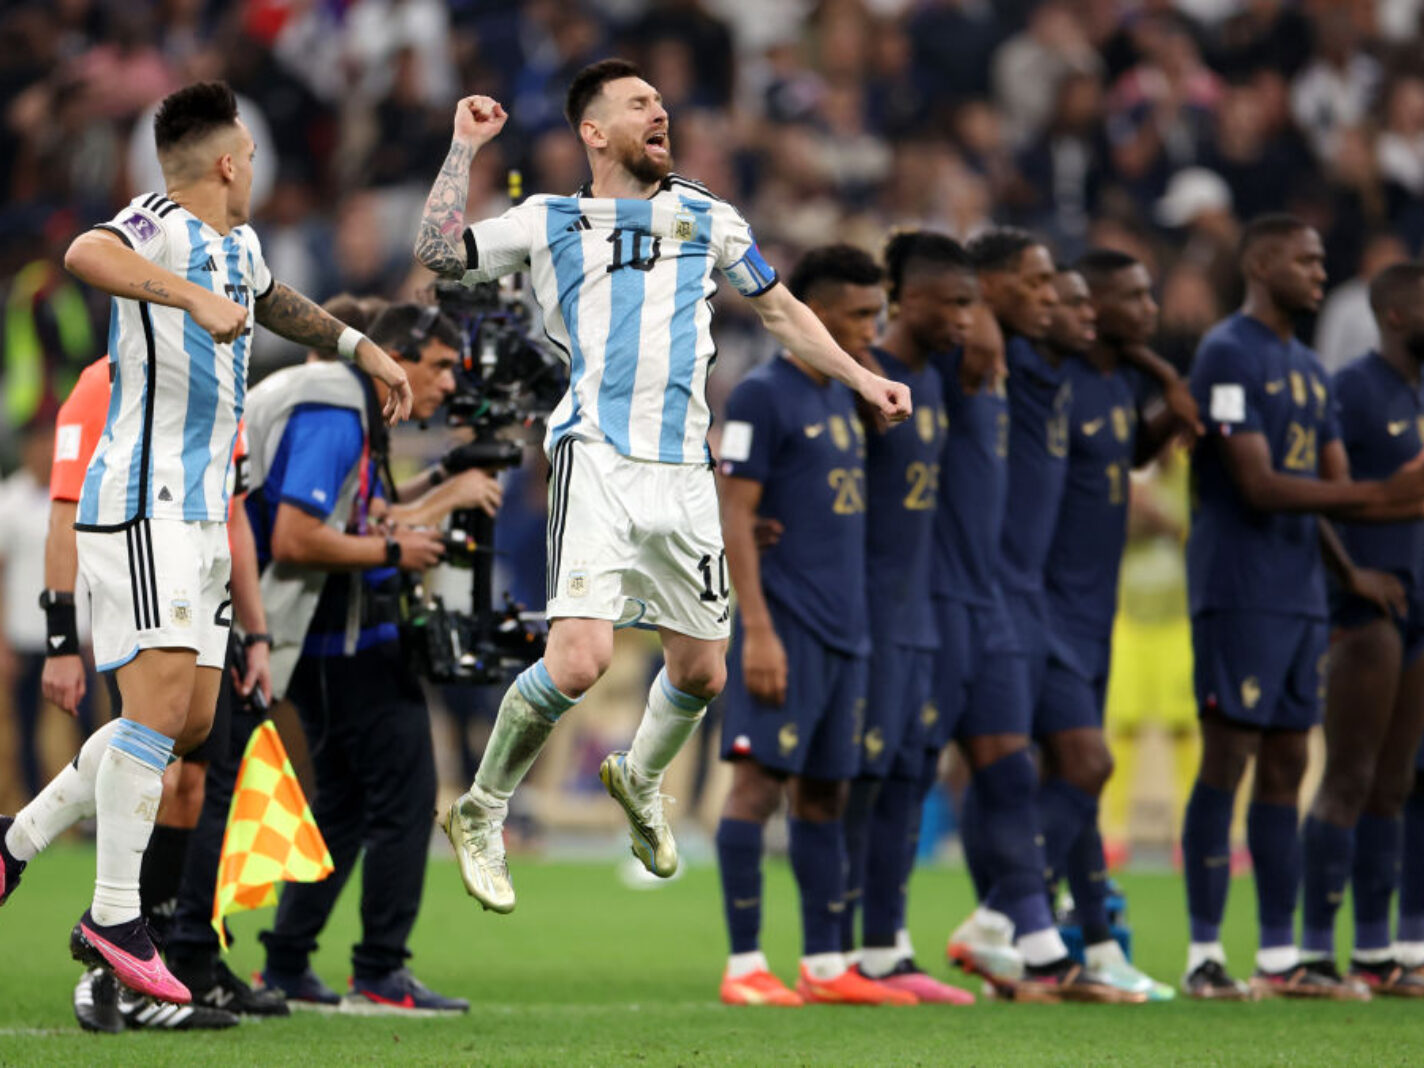 Photos: Argentina beats France on penalty kicks to win the 2022 World Cup